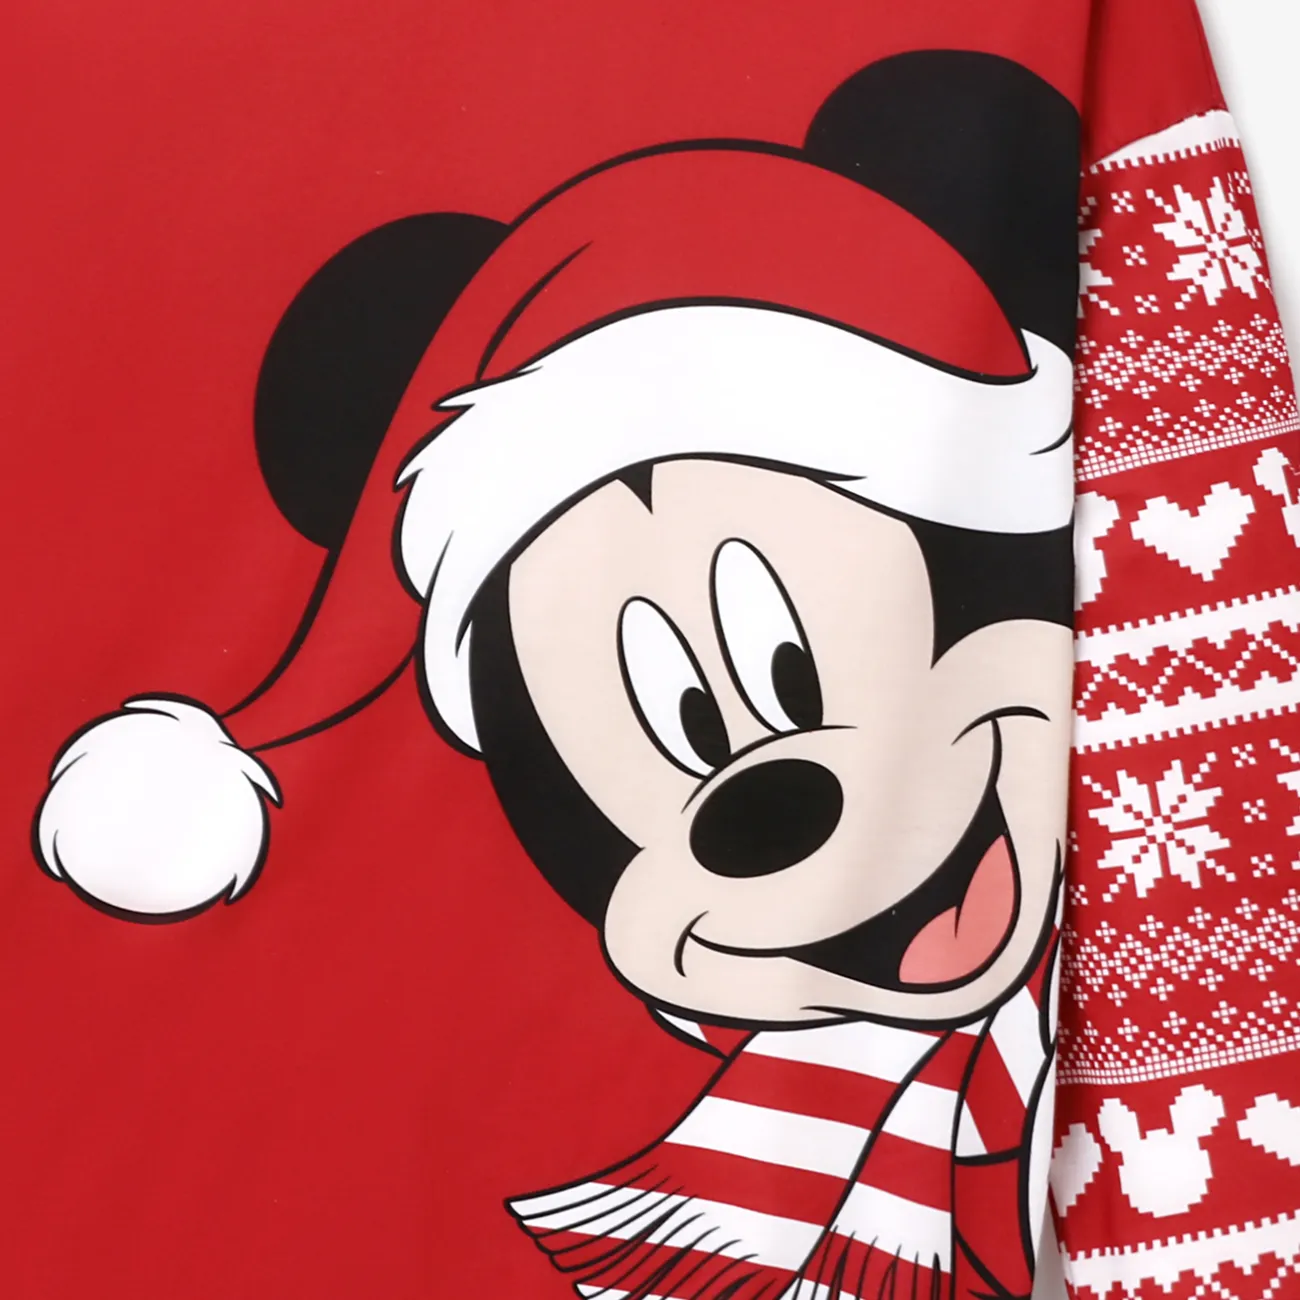 Disney Mickey and Friends Family Matching Christmas Character Print Long-sleeve Hooded Top  Red big image 1